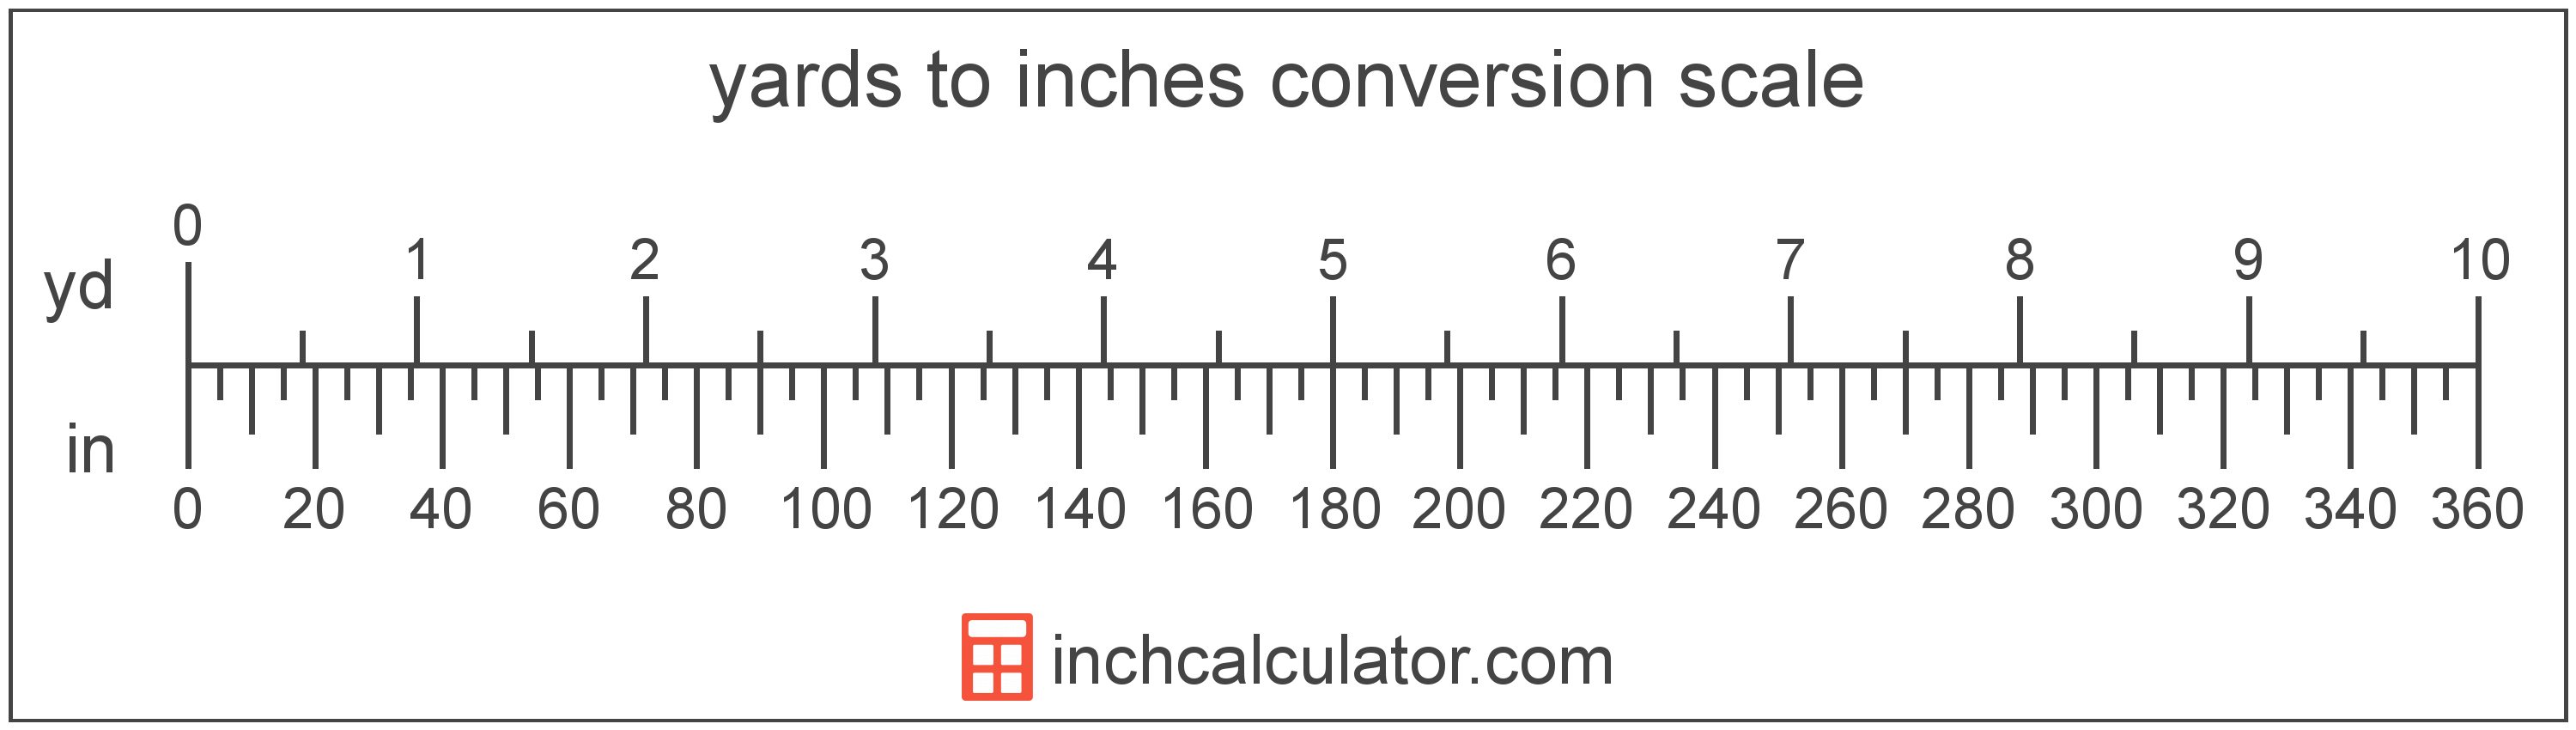 conversion scale showing inches and equivalent yards length values